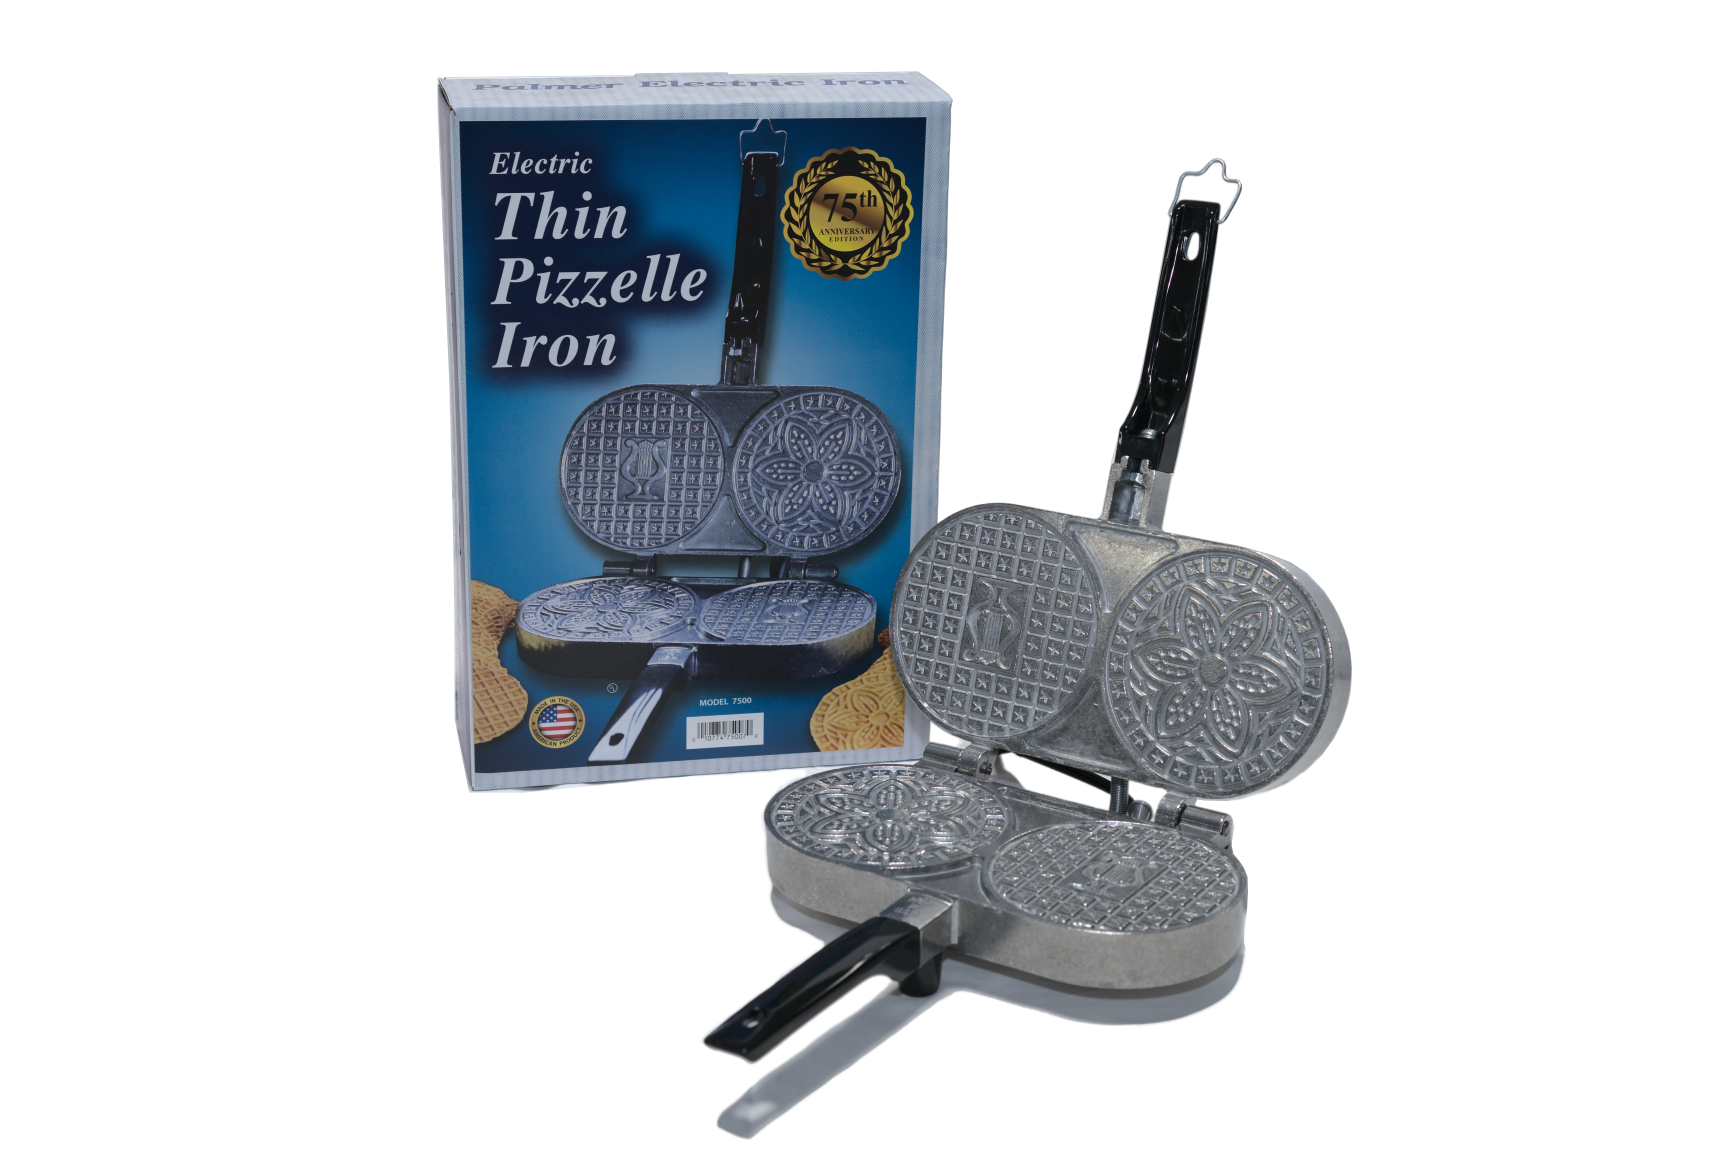 Palmer Model 7500 Extra Thin Pizzelle Iron– Rural Queen Company